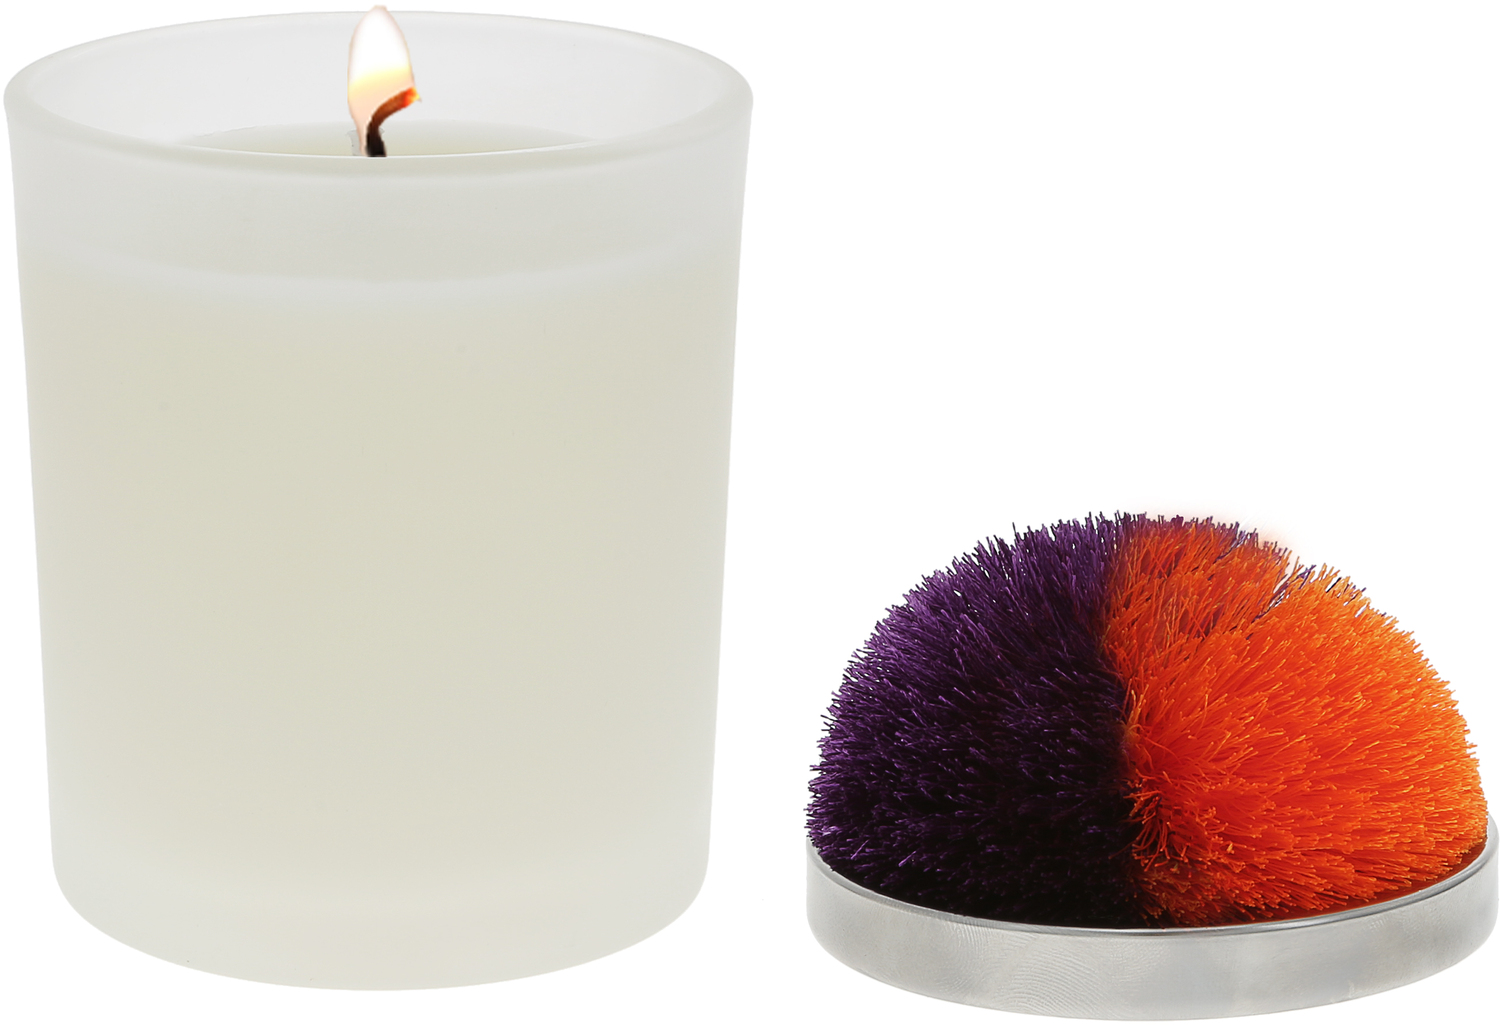 Blank - Purple & Orange by Repre-Scent - Blank - Purple & Orange - 5.5 oz - 100% Soy Wax Candle with Pom Pom Lid
Scent: Tranquility